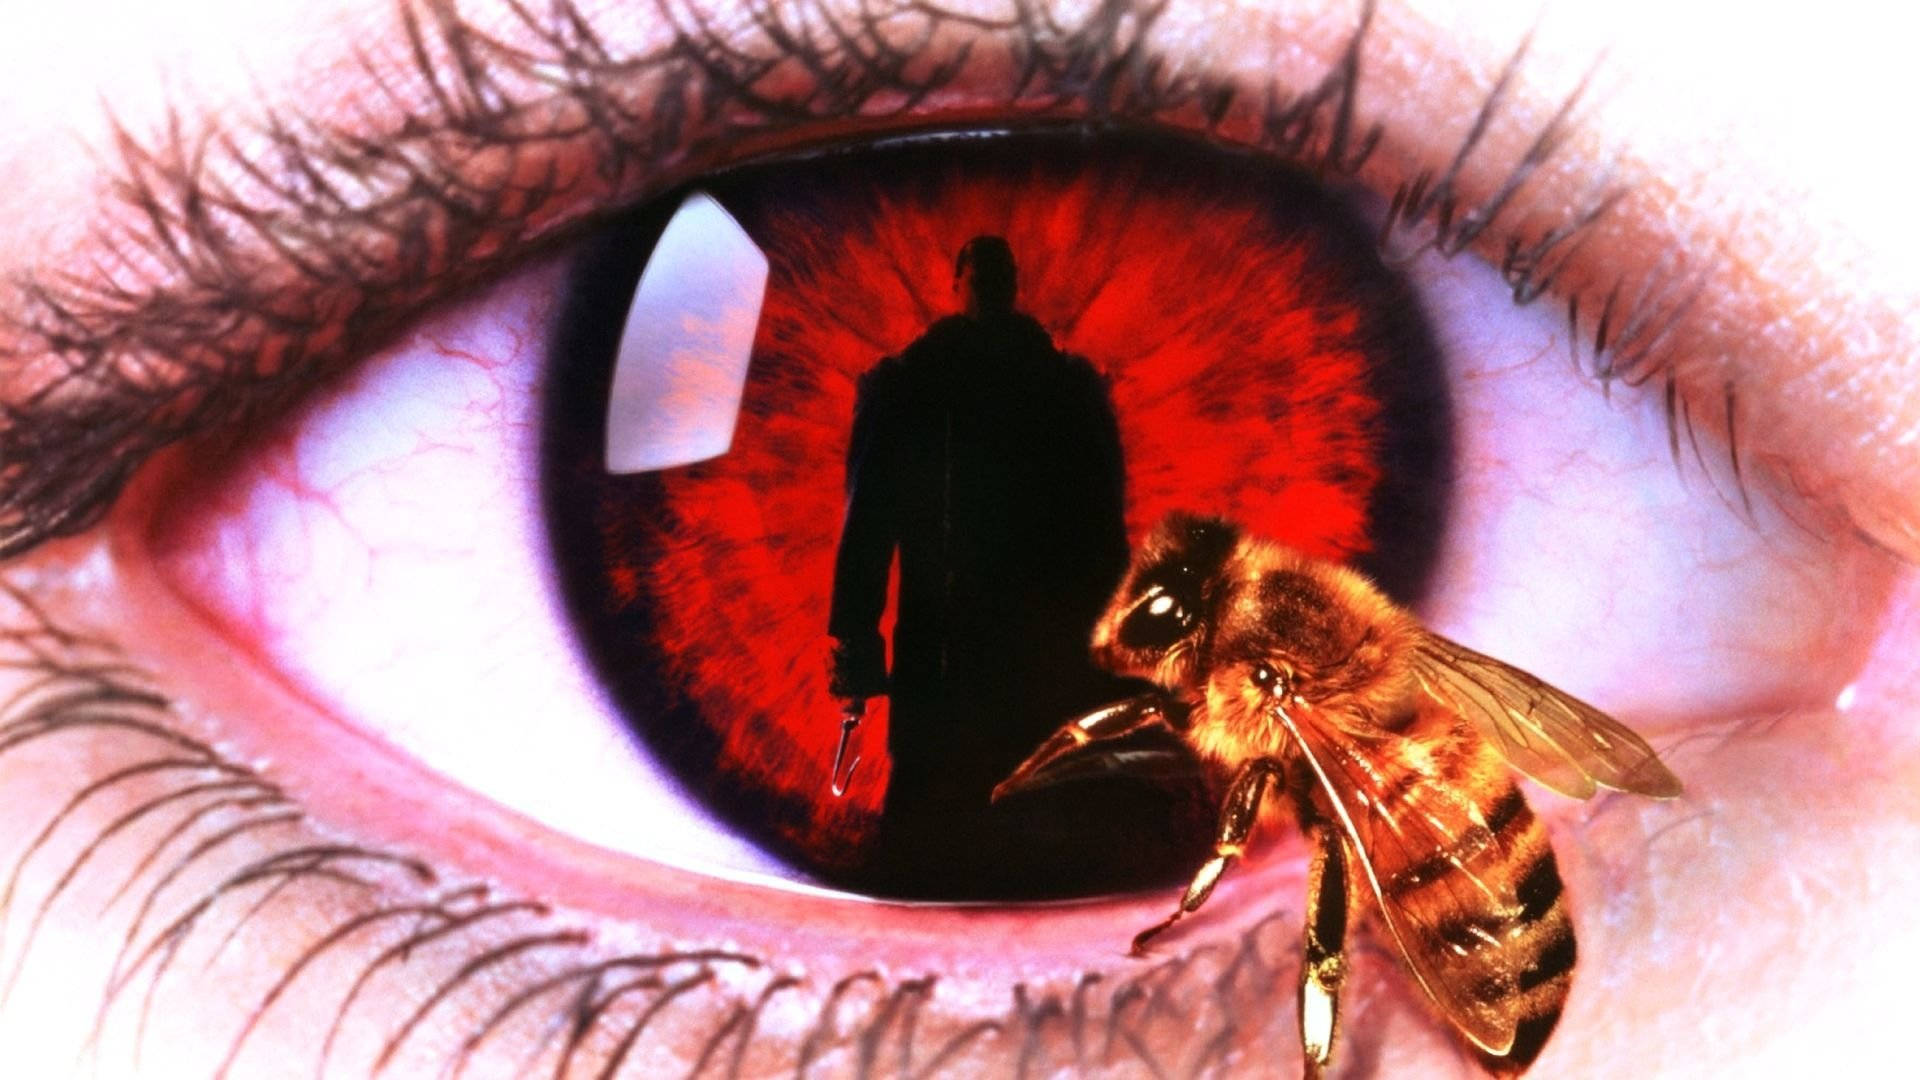 Candyman Bee On Eyes Close-Up Wallpaper